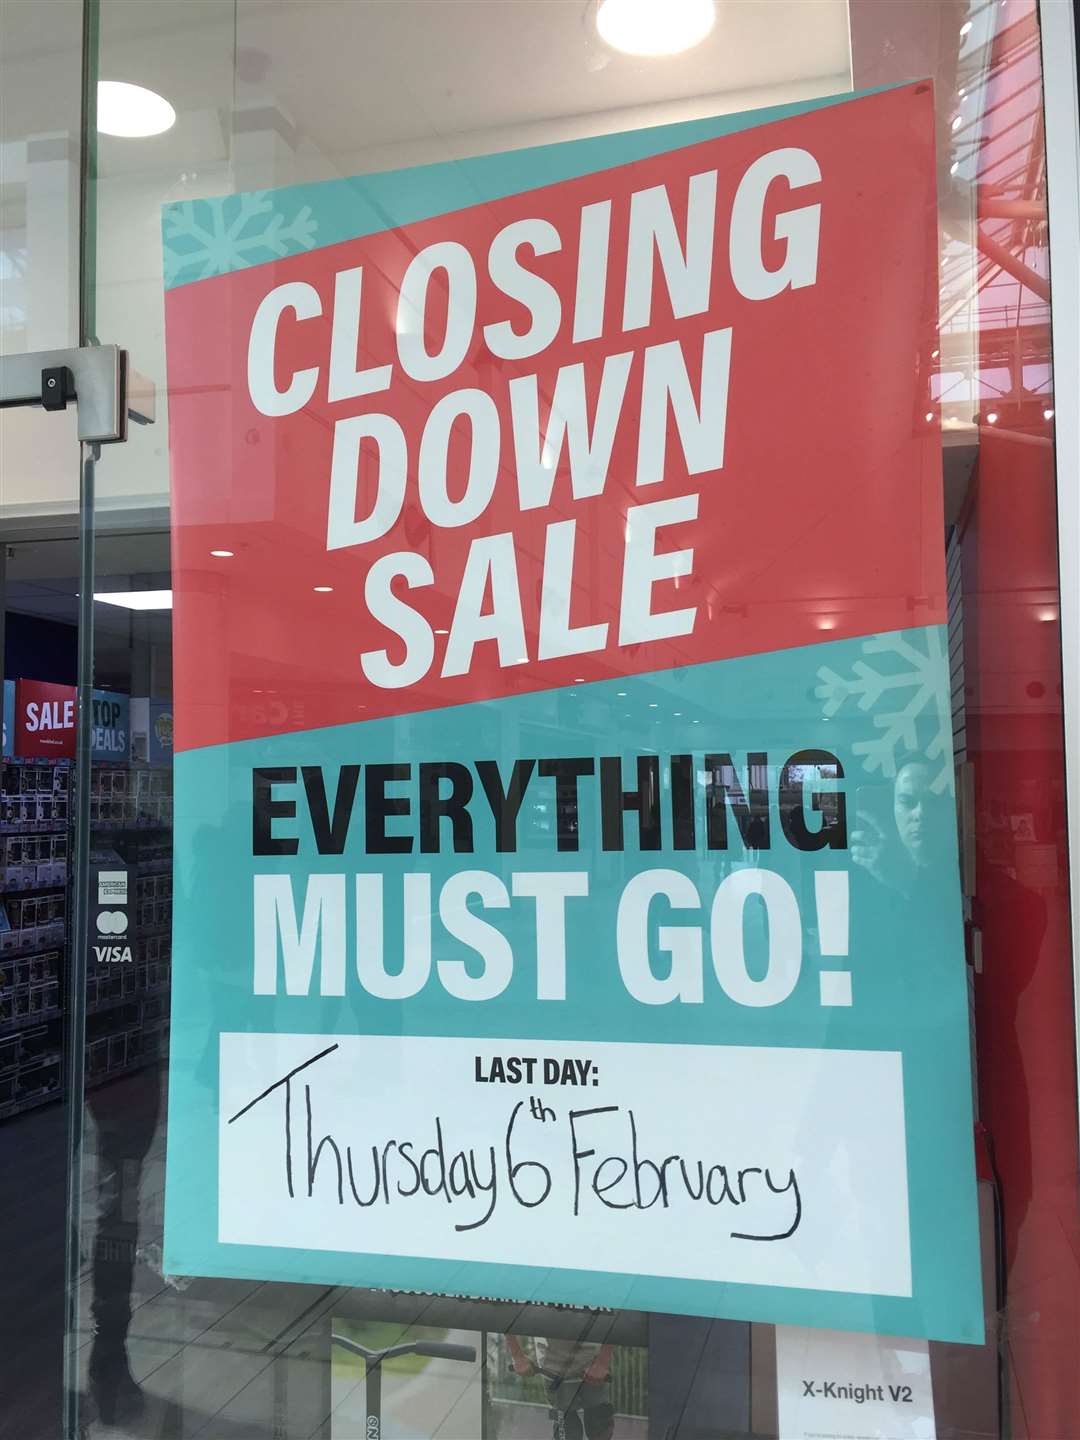 The store is due to close on Thursday